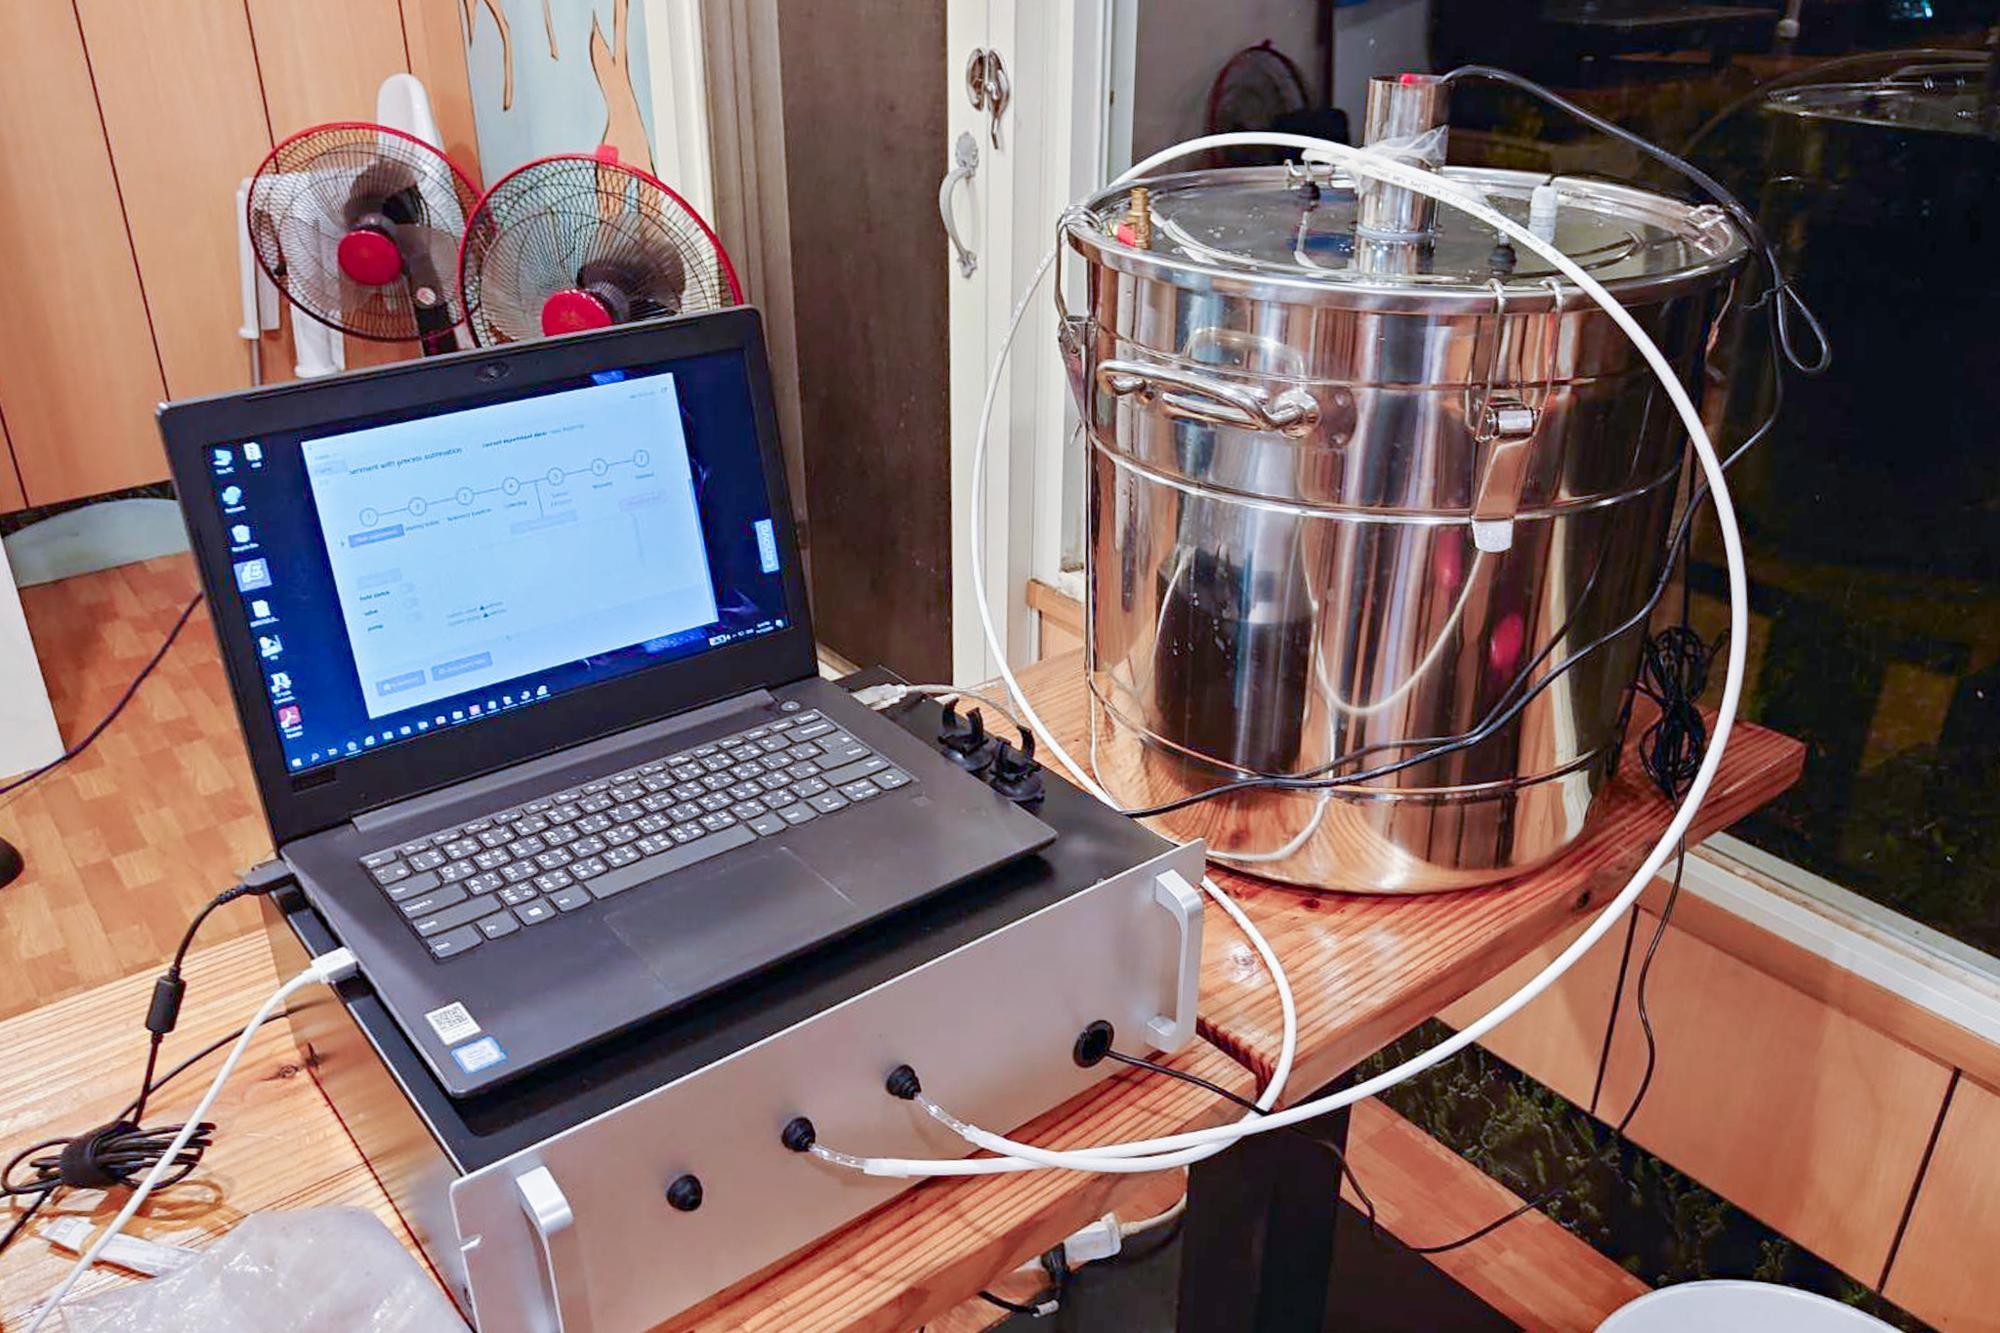 M'utu coffee farmers employ the electronic nose developed by NTHU's Electrical Engineering Professor Kea-Tiong Tang (鄭桂忠) to monitor coffee bean fermentation acidity, enhancing the flavor of the coffee.